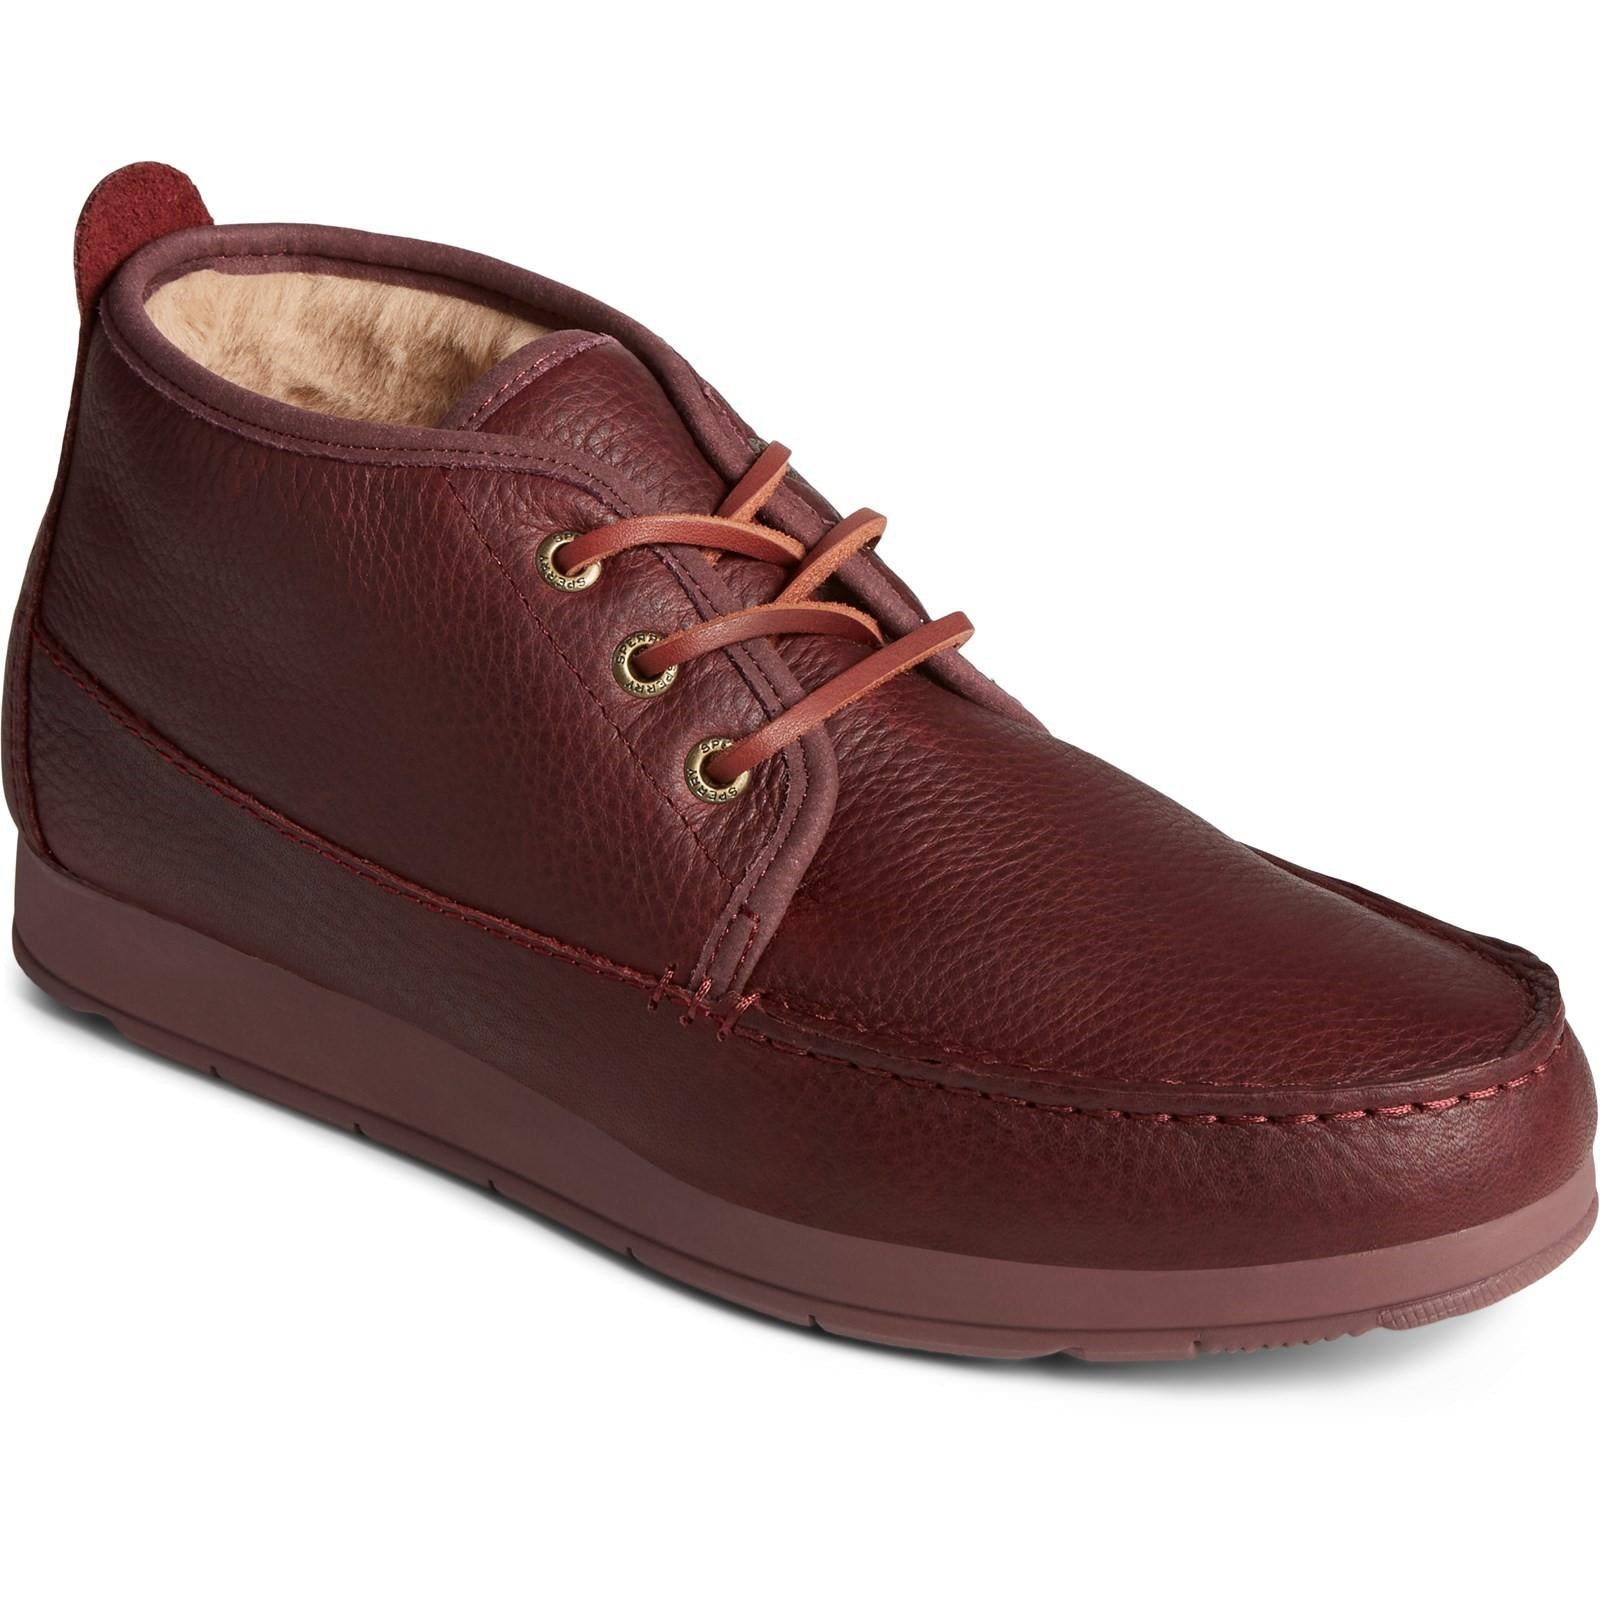 Sperry Top-sider Moc Sider Chukka Boots